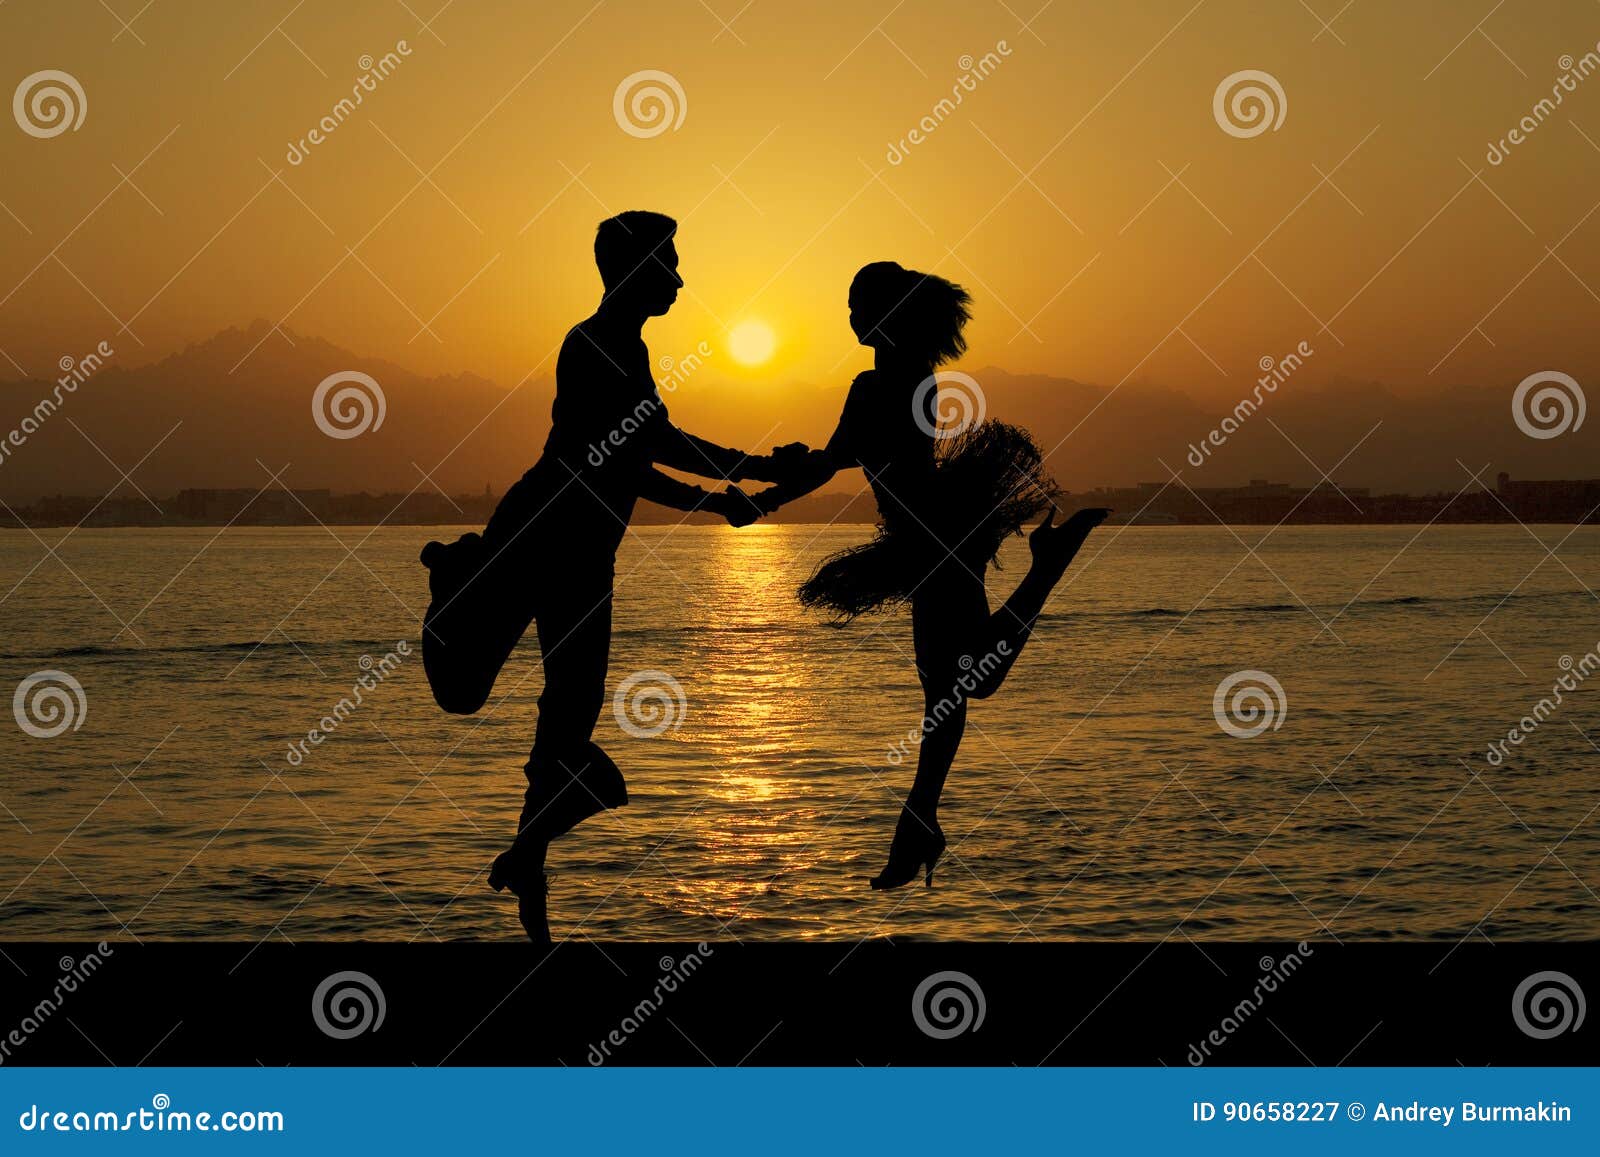 Silhouette Couple In The Active Ballroom Dance On Sunset